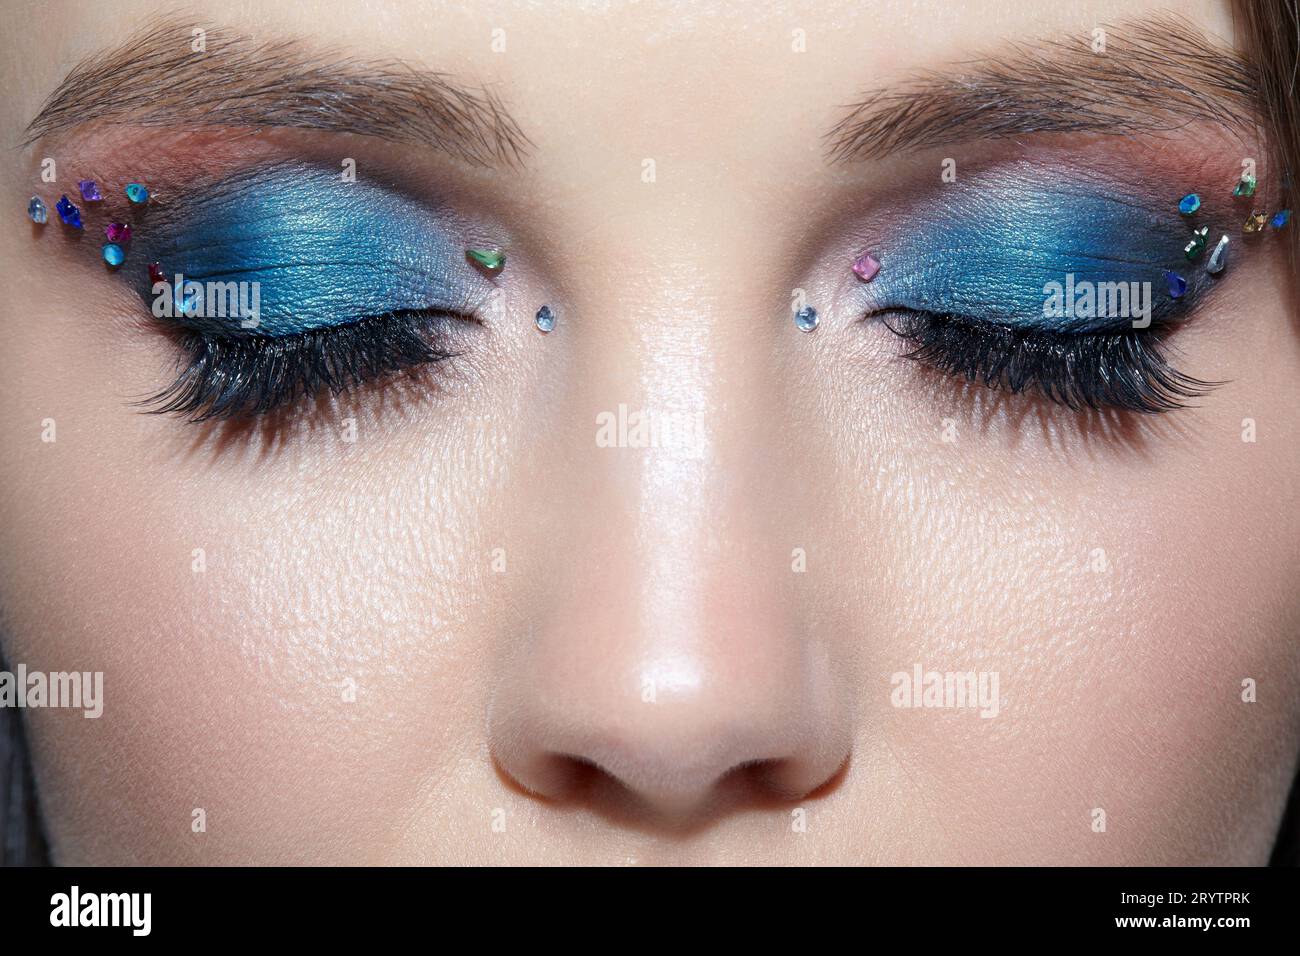 Closeup shot of human woman face with eyes closed and beauty makeup with blue eye shadow make up and rhinestones Stock Photo